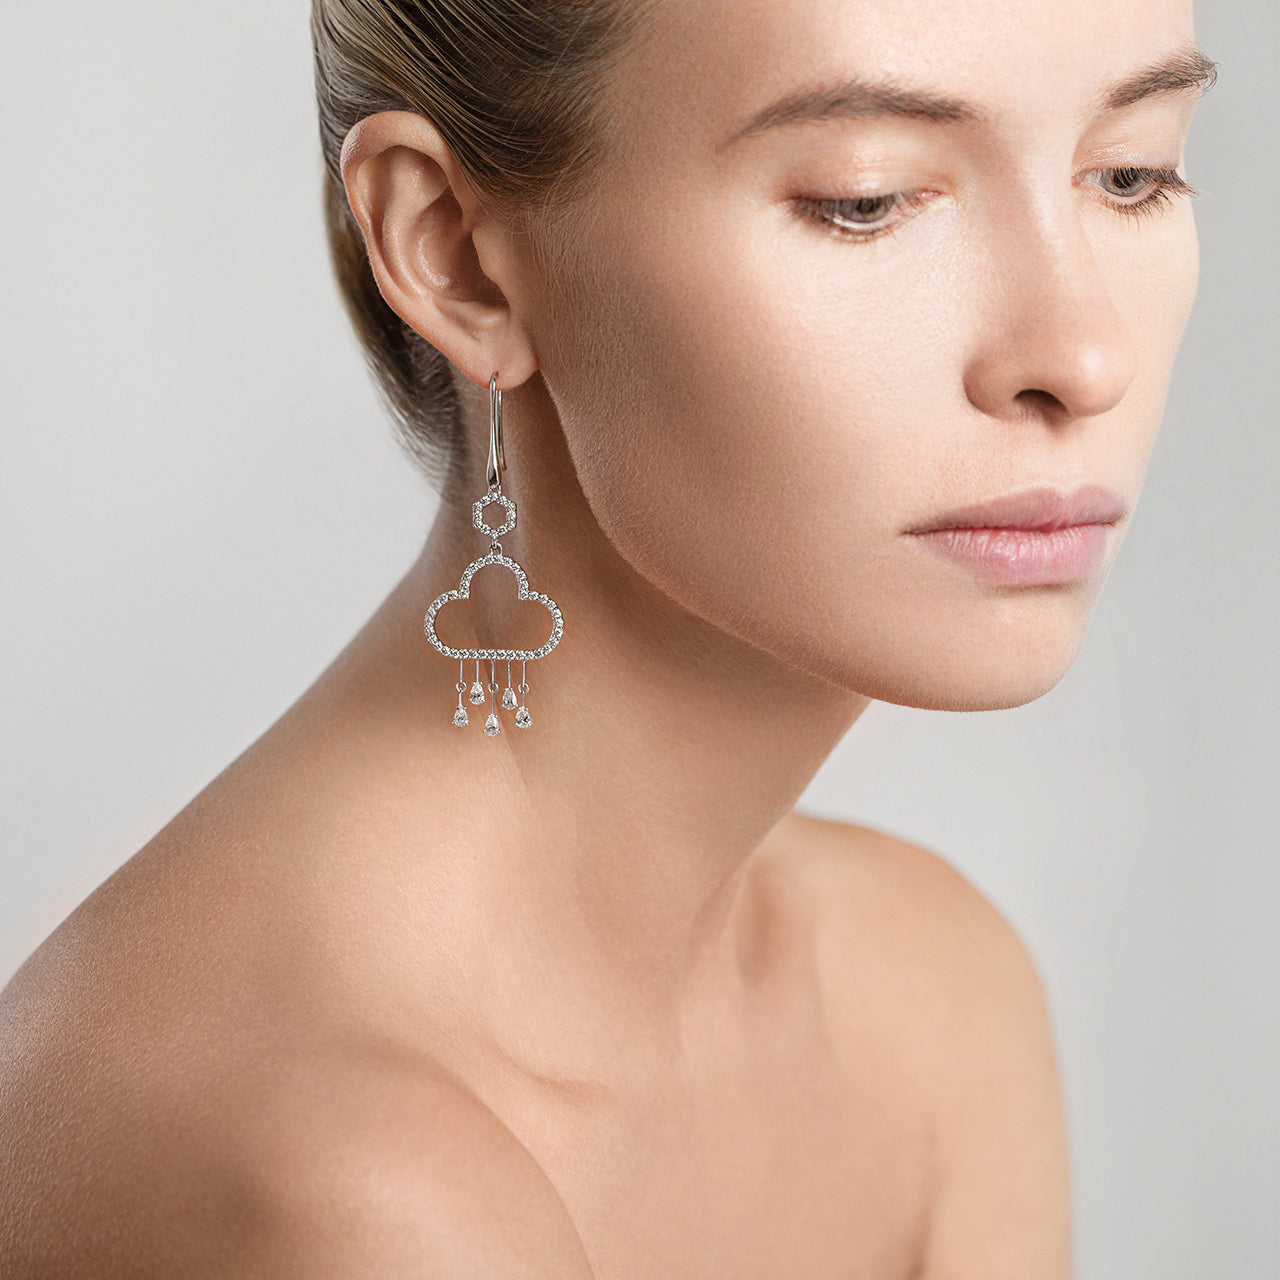 Extraordinary earrings, silver jewelry piece with natural diamonds